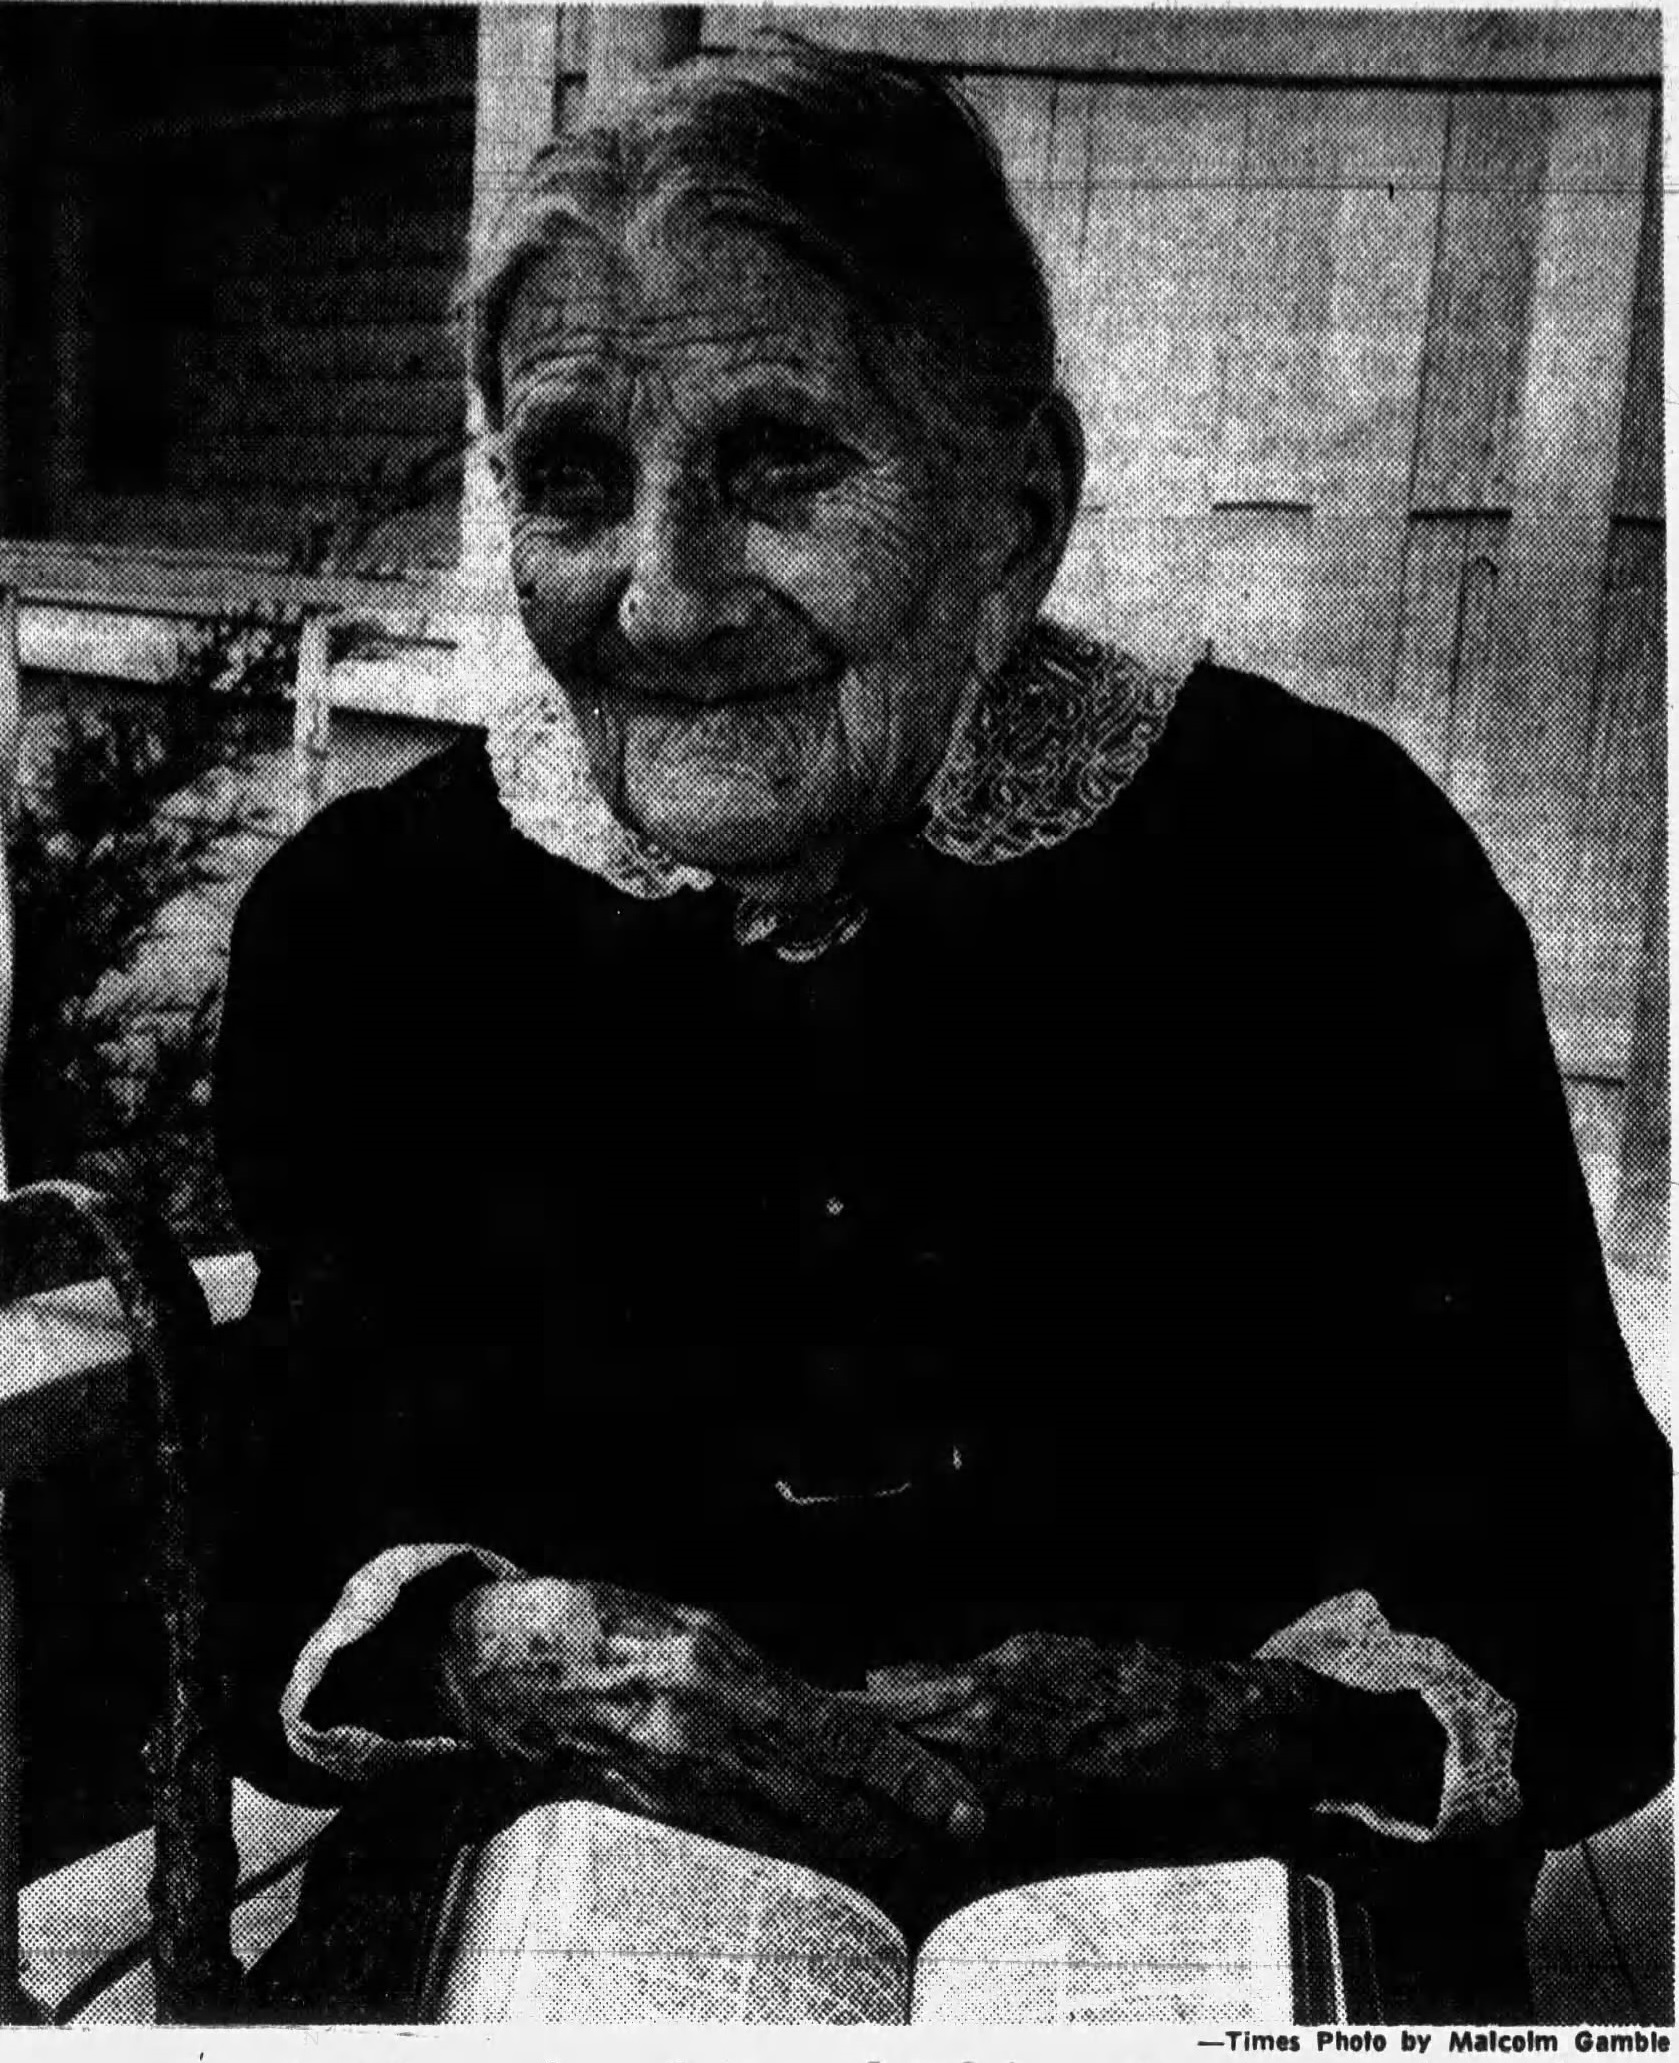 On her 108th birthday in 1963. (Source: The Asheville Times)